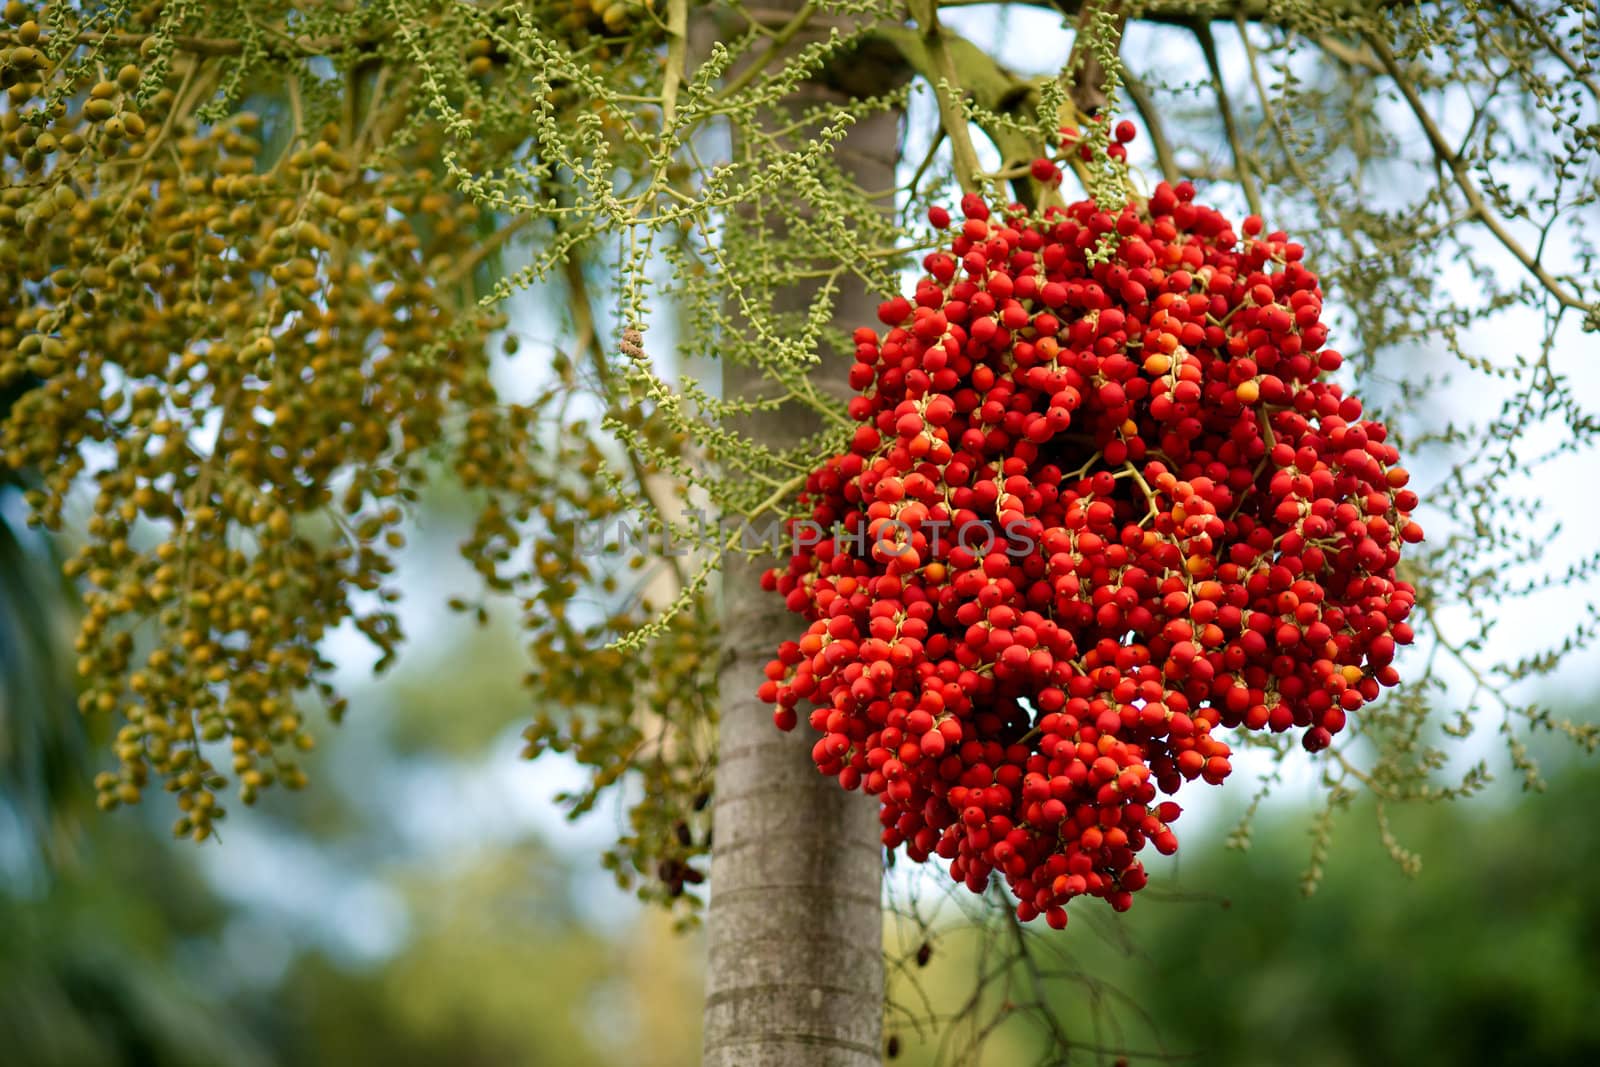 Bunch of red berries on the tree